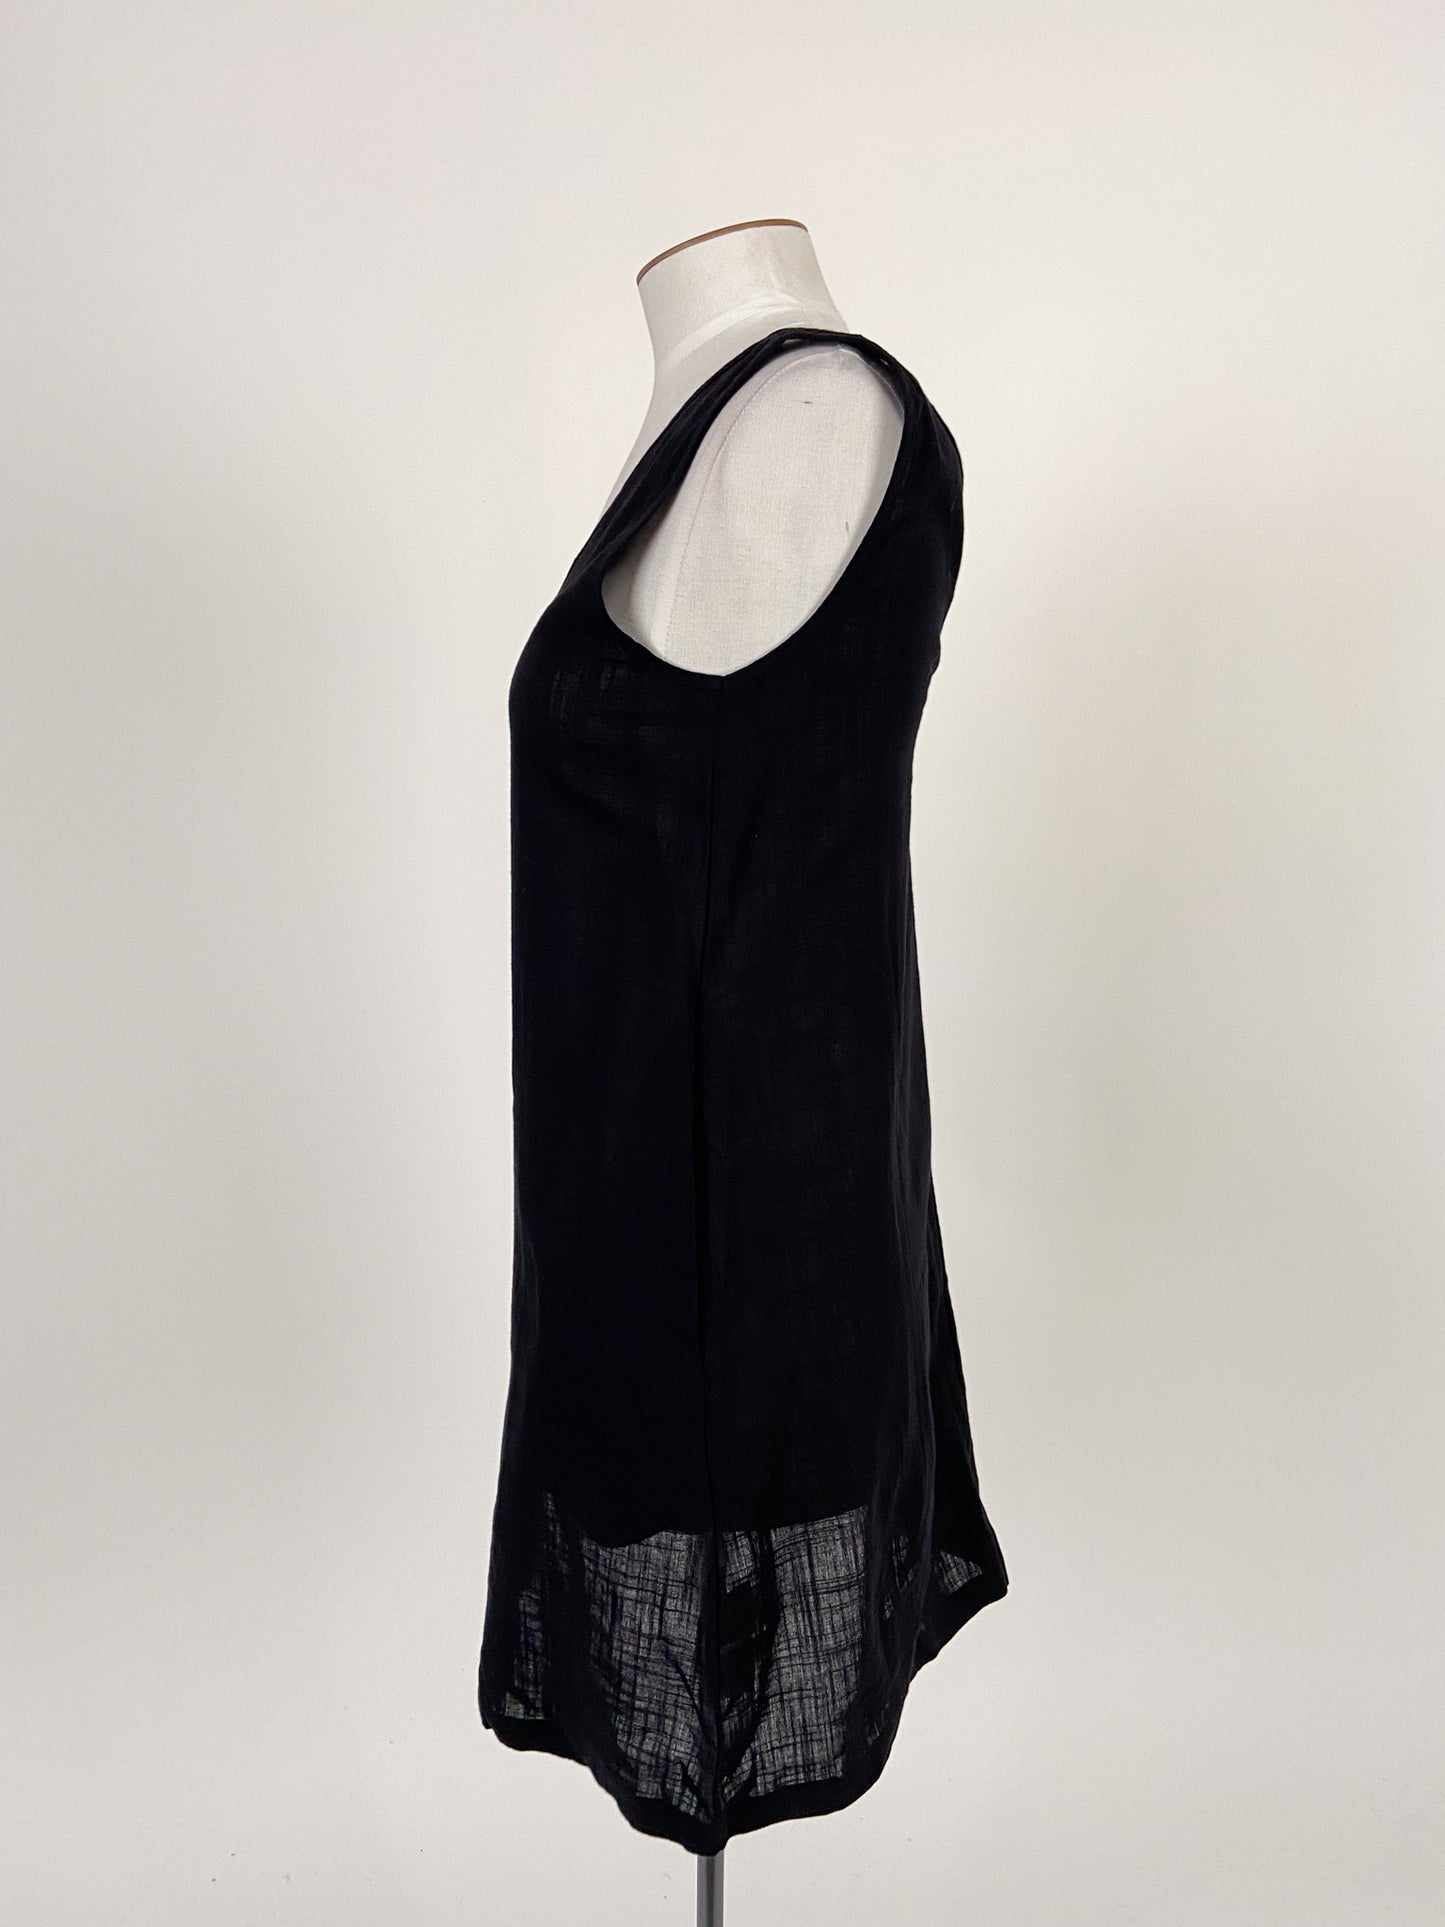 Misquared | Black Casual Dress | Size S